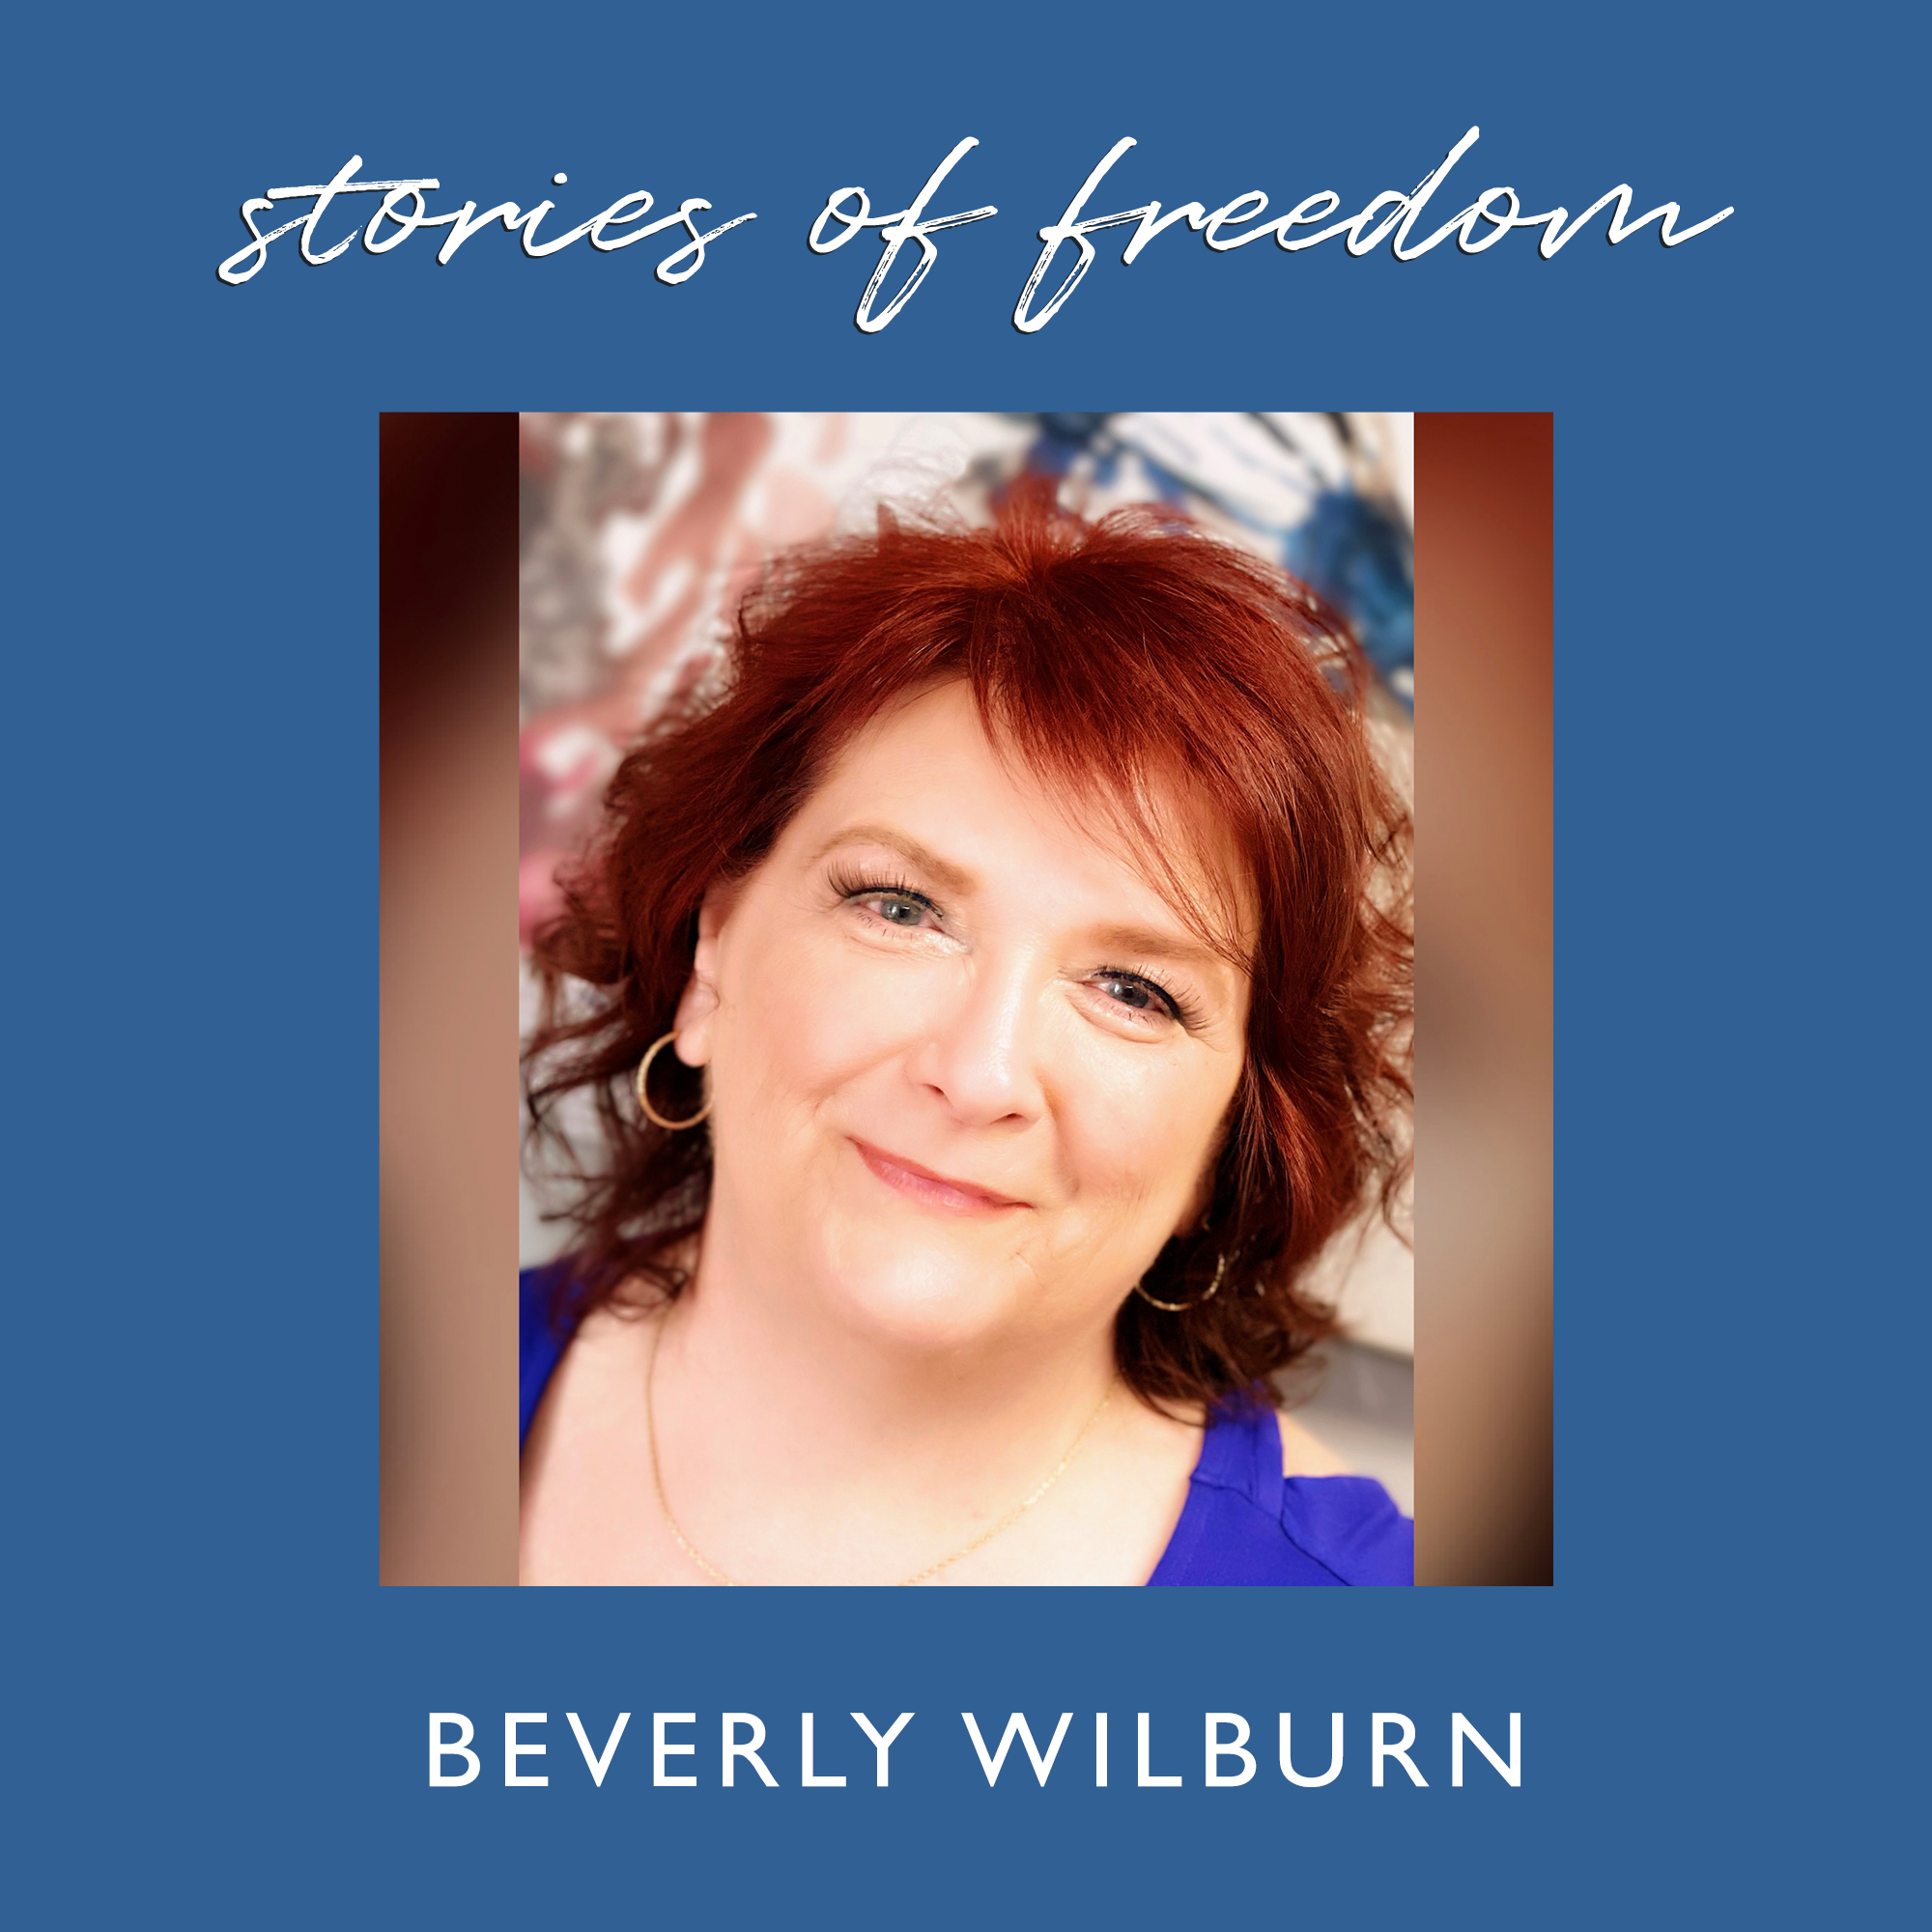 Beverly Wilburn: Atheist Turns Evangelist When She Encounters a God of Love